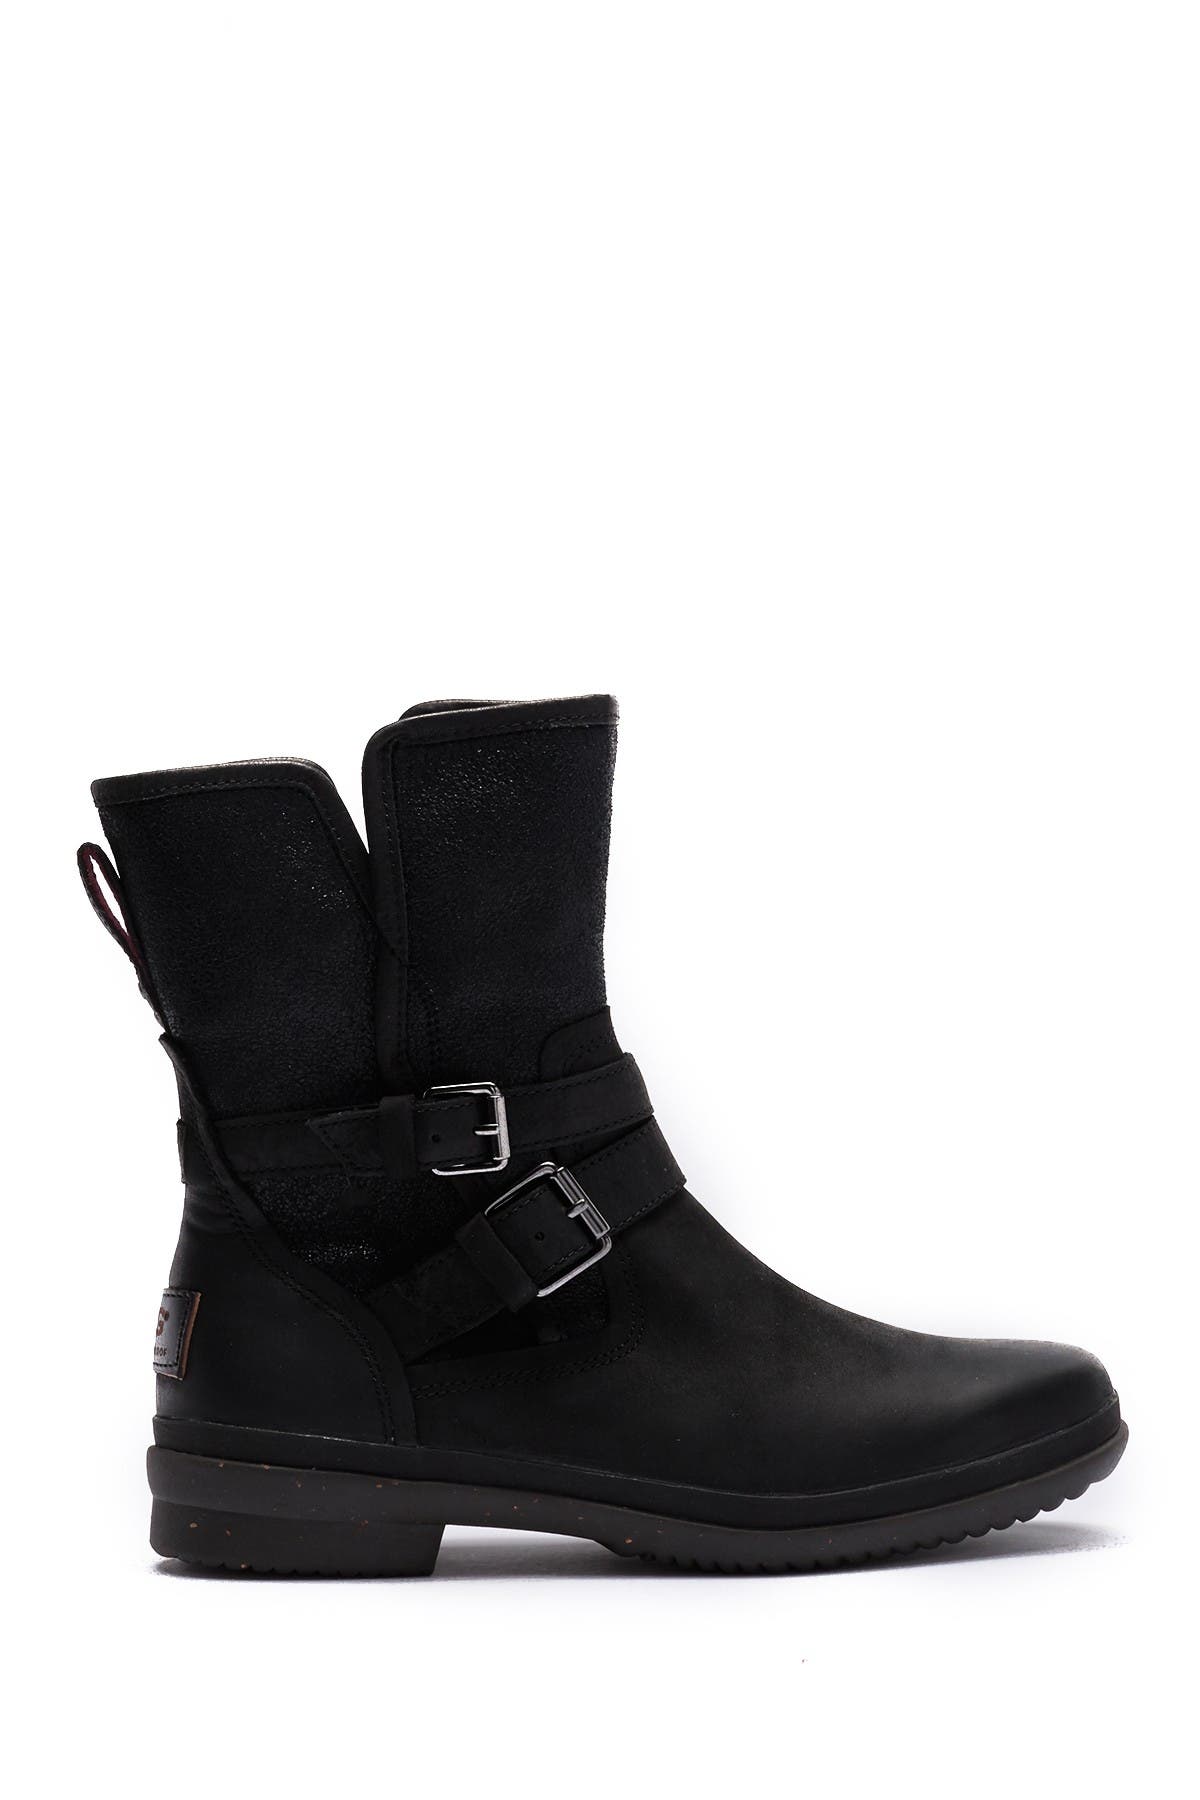 ugg simmens leather boots